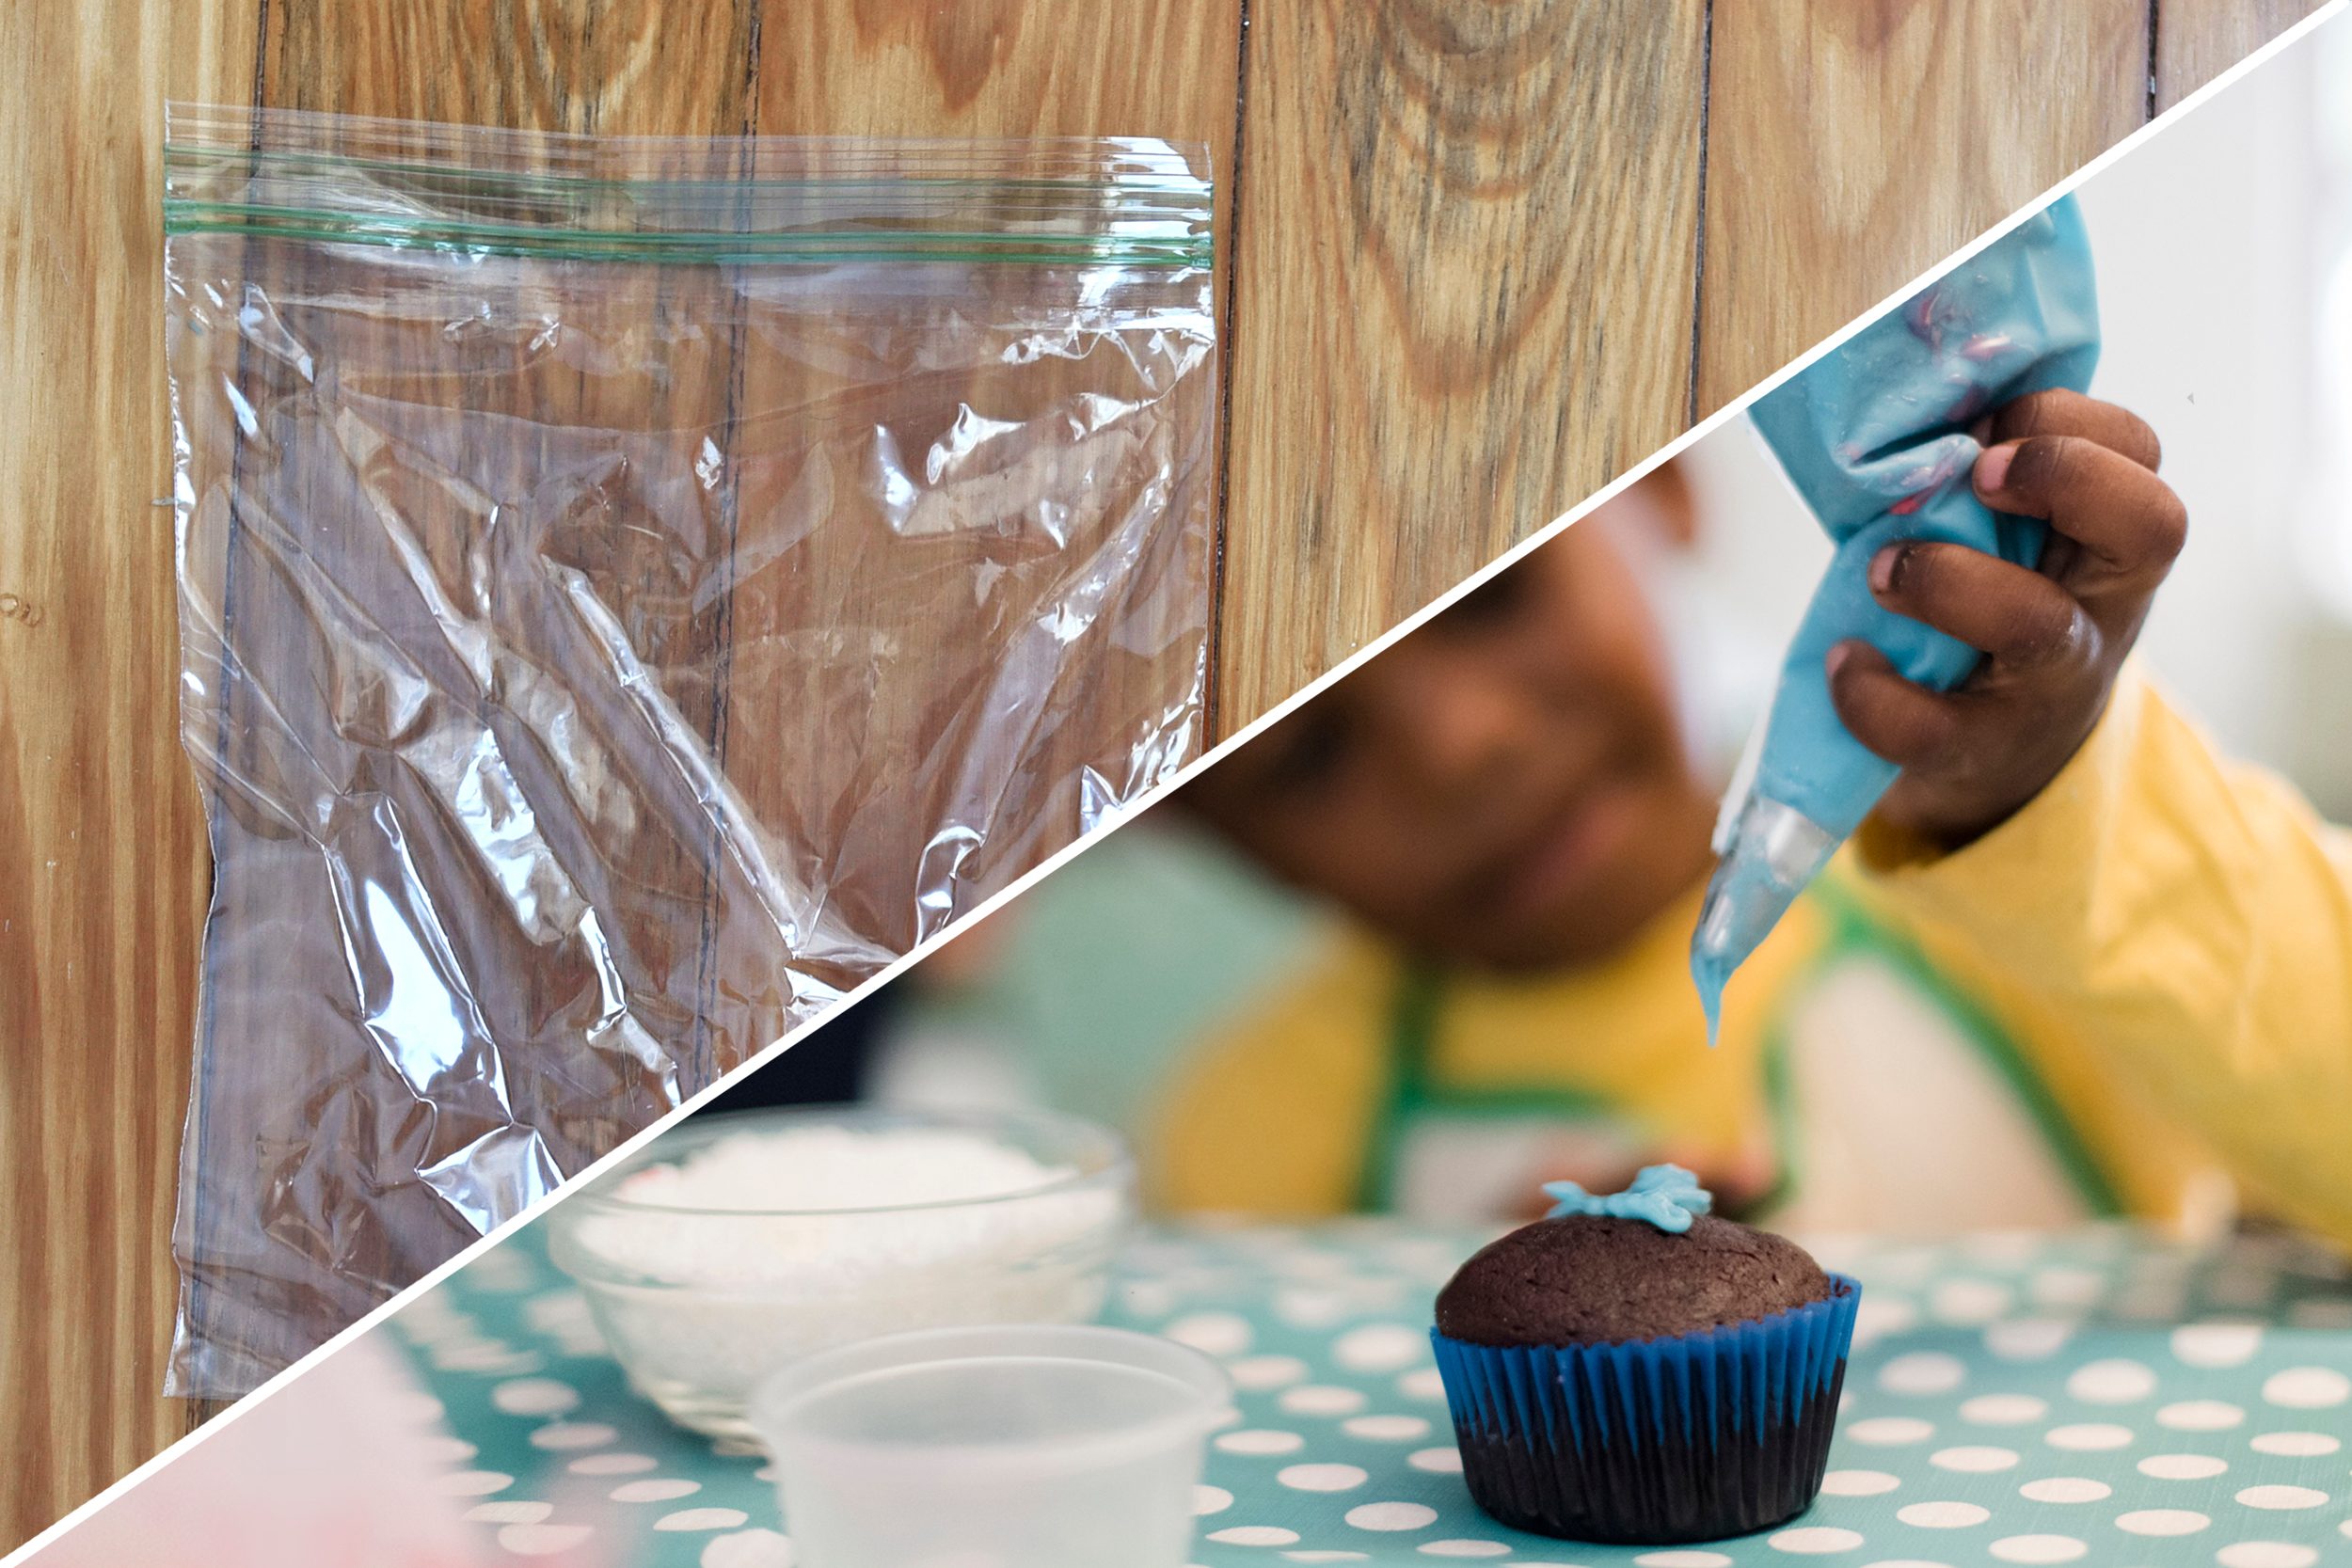 New Uses for Plastic Bags — How to Use Ziploc Bags Around the House